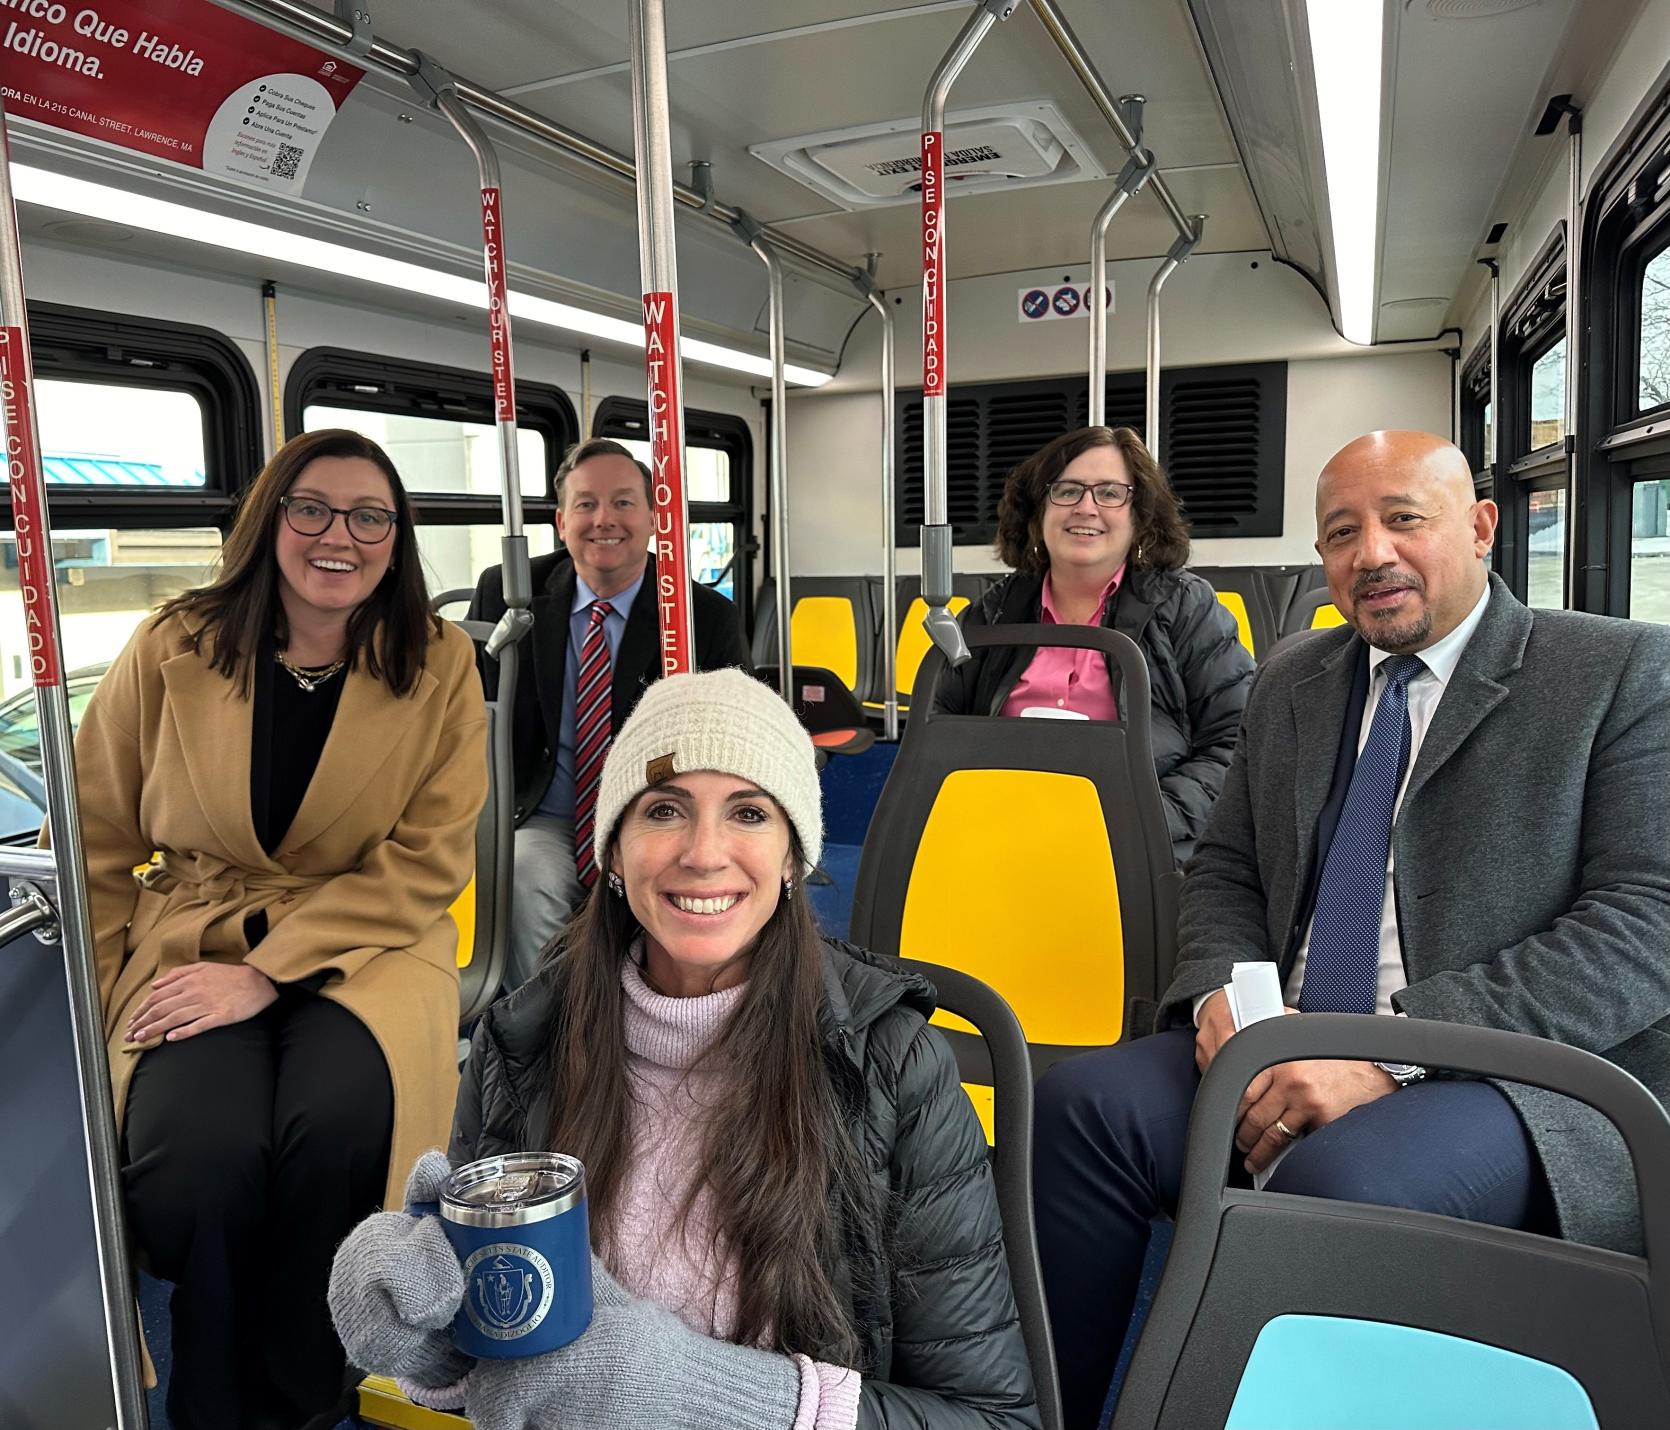 Auditor DiZoglio is pictured riding a MeVa bus with Mayors from Haverhill, Lawrence, Amesbury, and Newburyport.